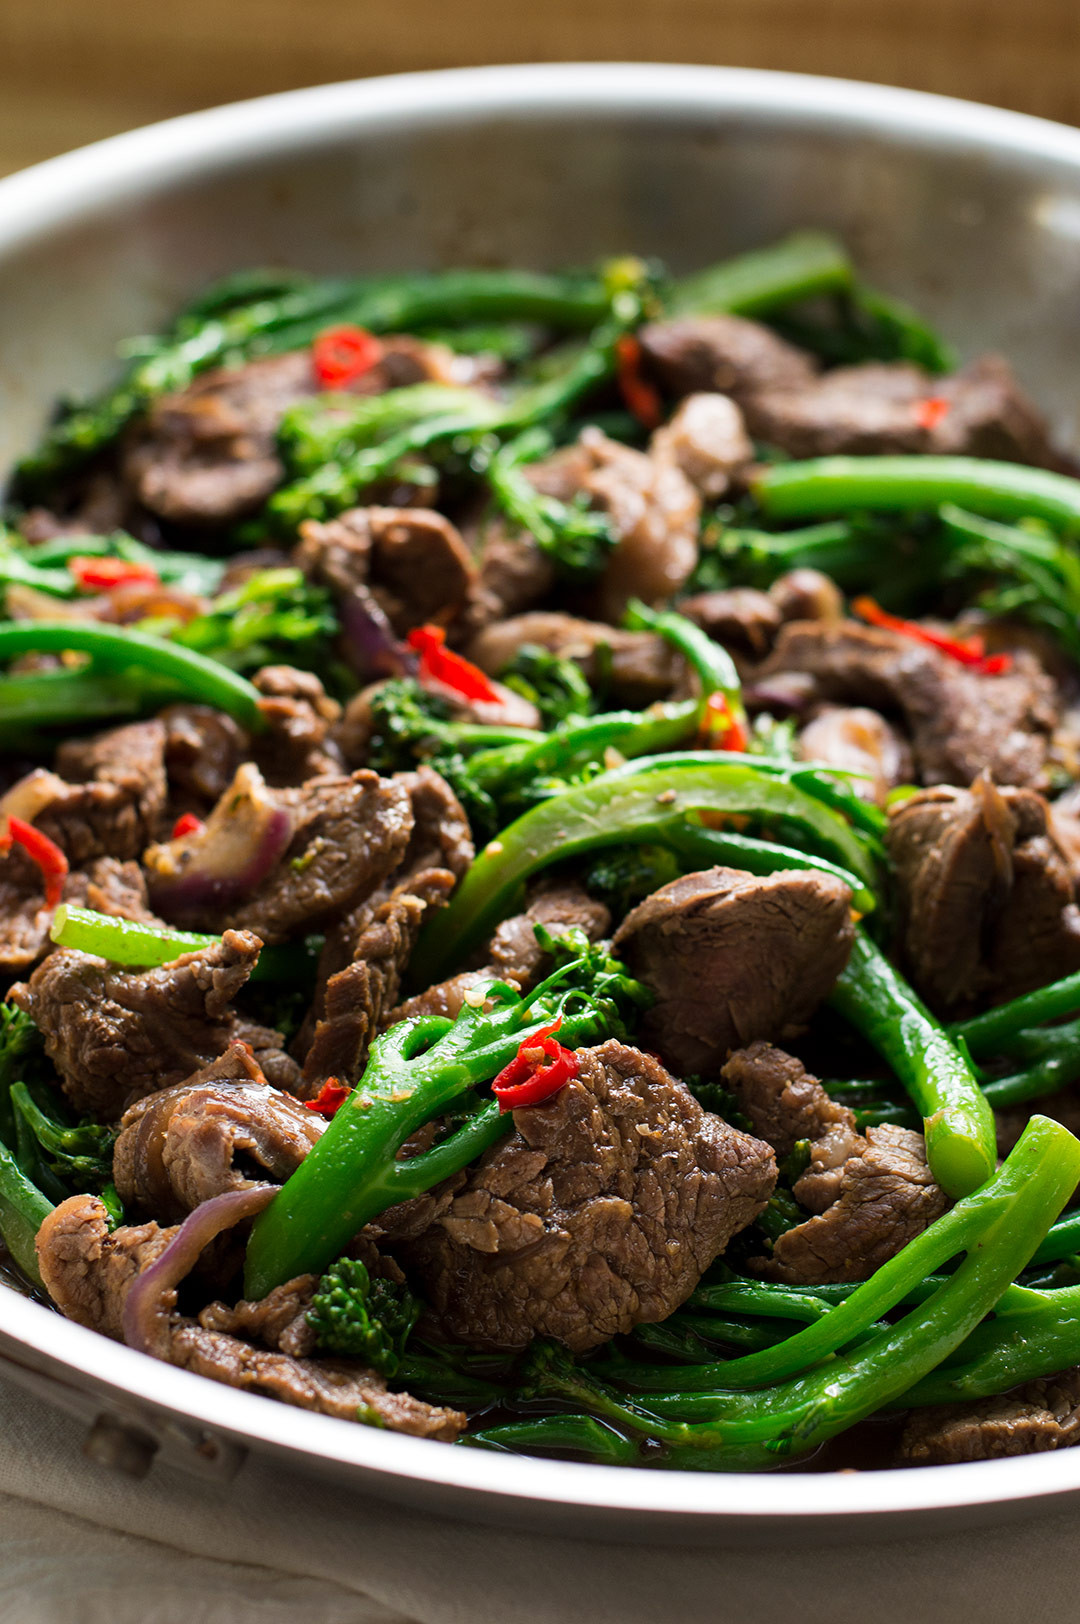 Beef And Broccoli Stir Fry
 Looking for inspiration Try our quick and easy beef